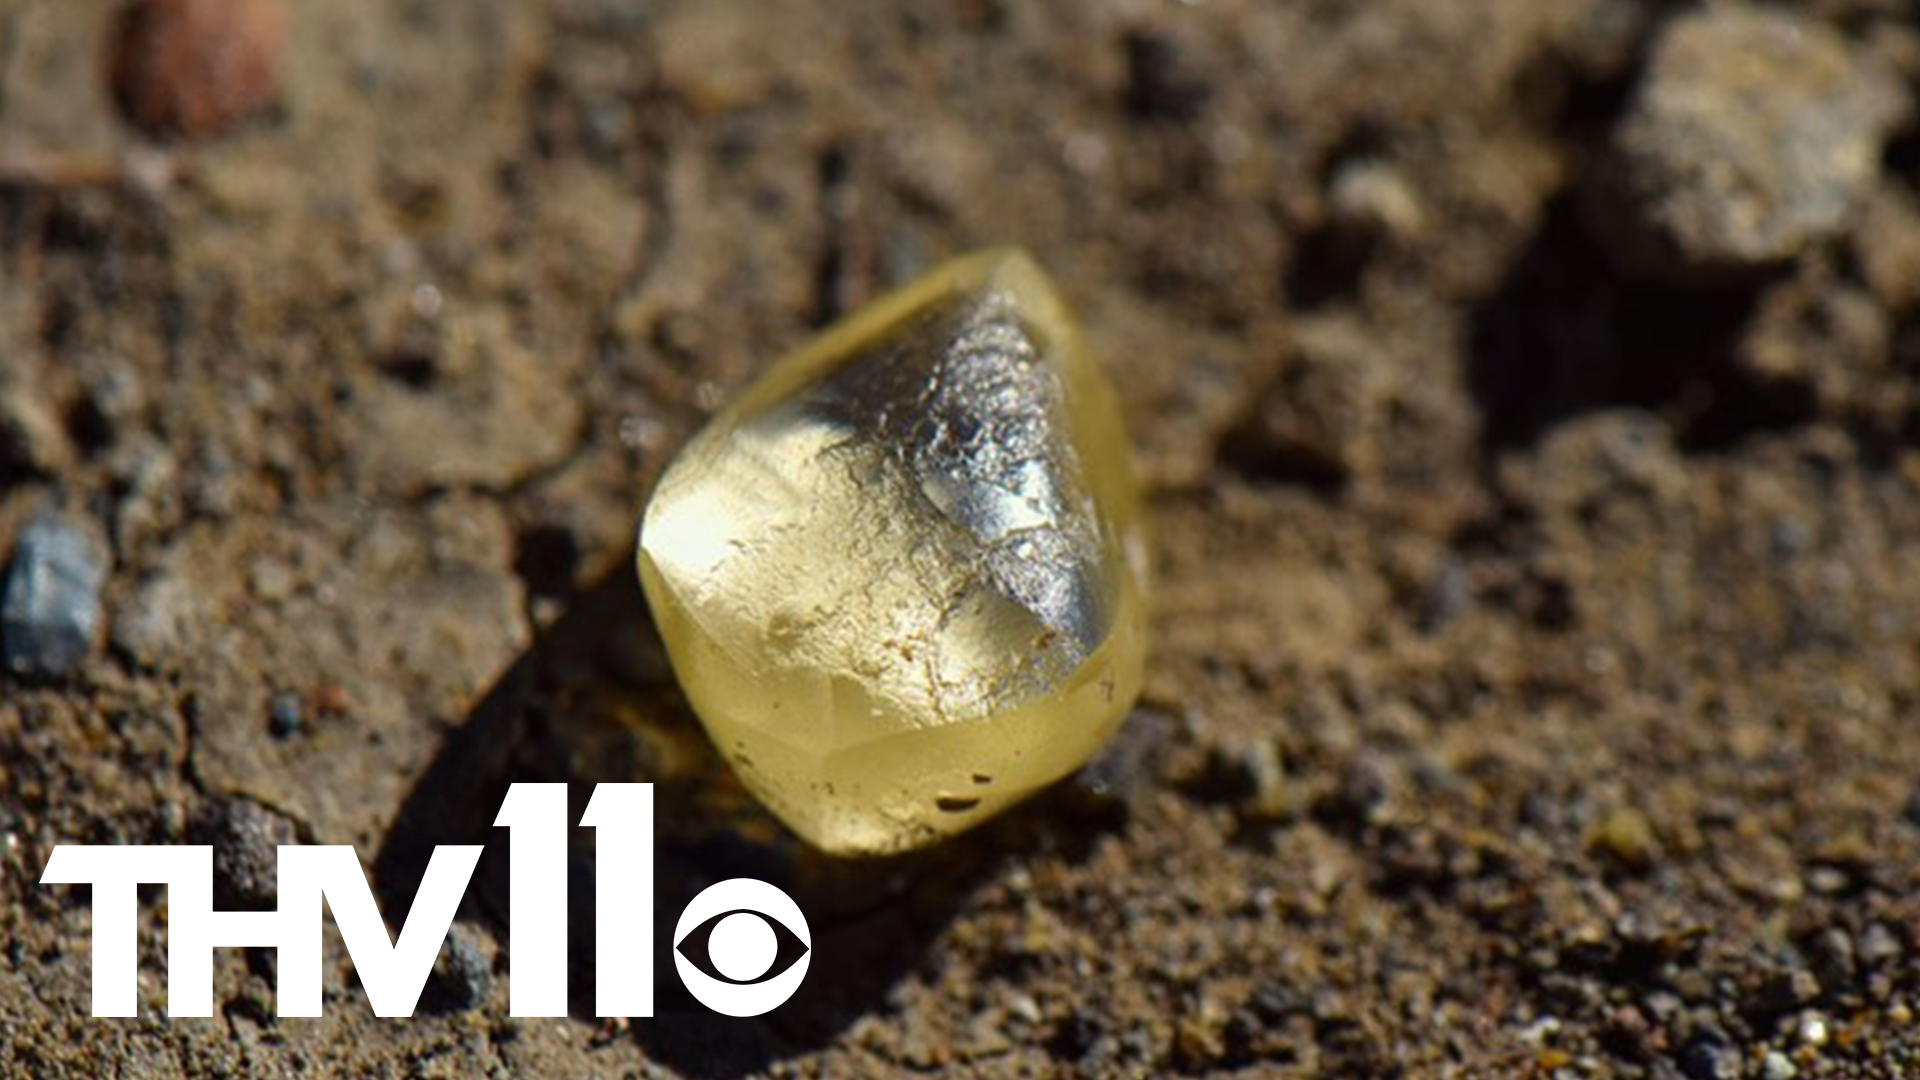 A California couple found a 4.38-carat yellow Diamond at Crater of Diamonds State Park.